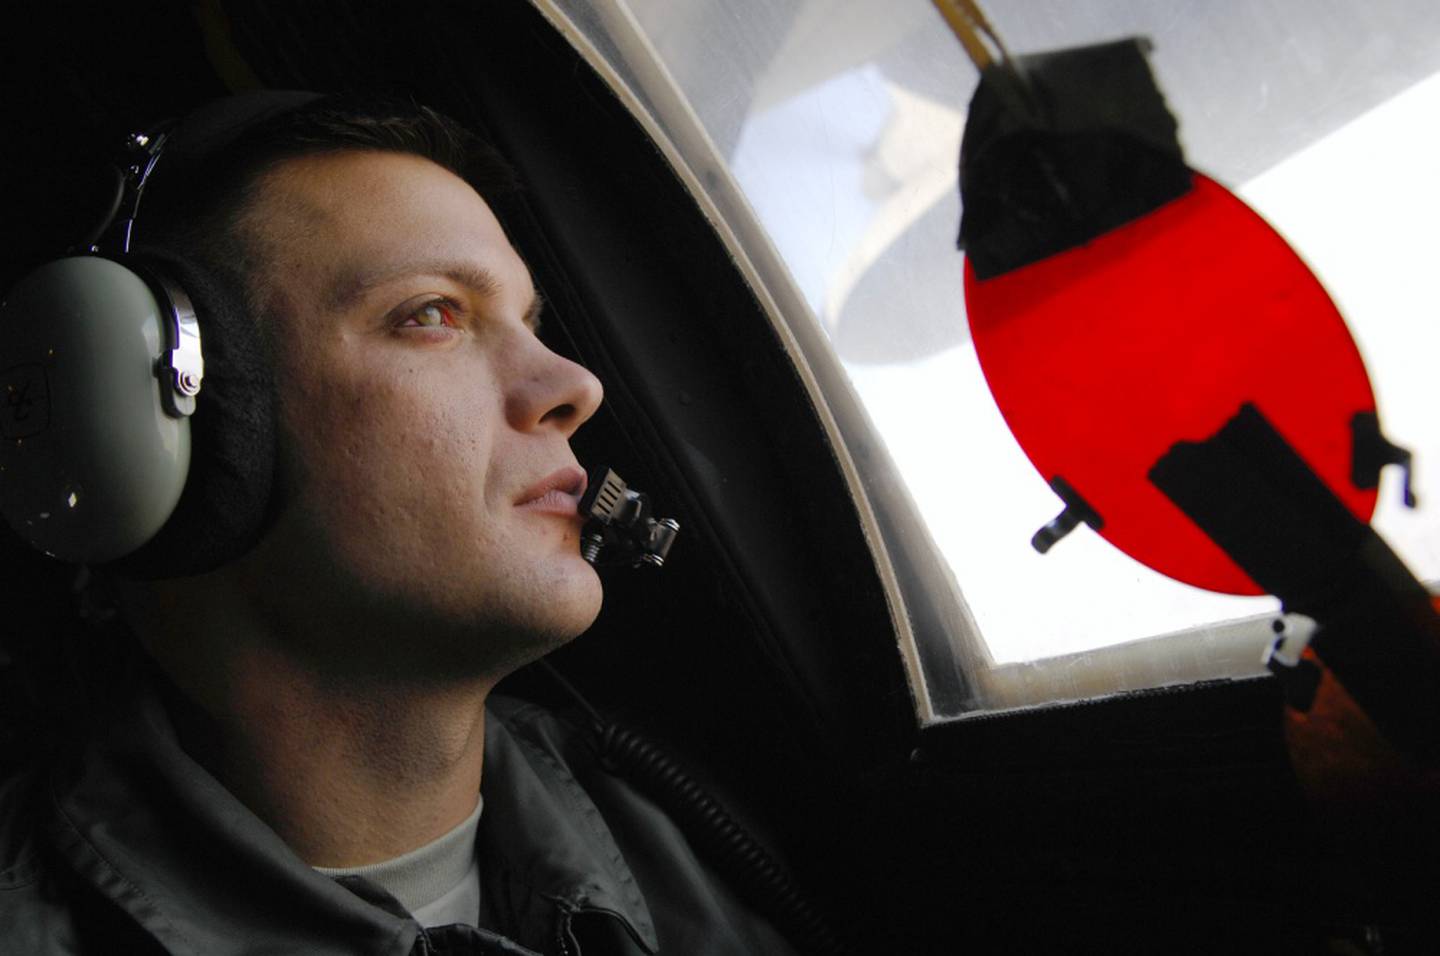 Staff Sgt. Jeremy Mayo, a 9th Special Operations Squadron loadmaster, learns how to signal an incoming U.S. Army MH-60K Blackhawk assigned to the 101st Airborne Division over Fort Campbell, Kentucky, Dec. 2, 2008. While the aerial refueling is taking place the loadmaster must be vigilant for any signs of difficulty and relay information to the pilots and flight engineer. (Senior Airman Julianne Showalter/Air Force)